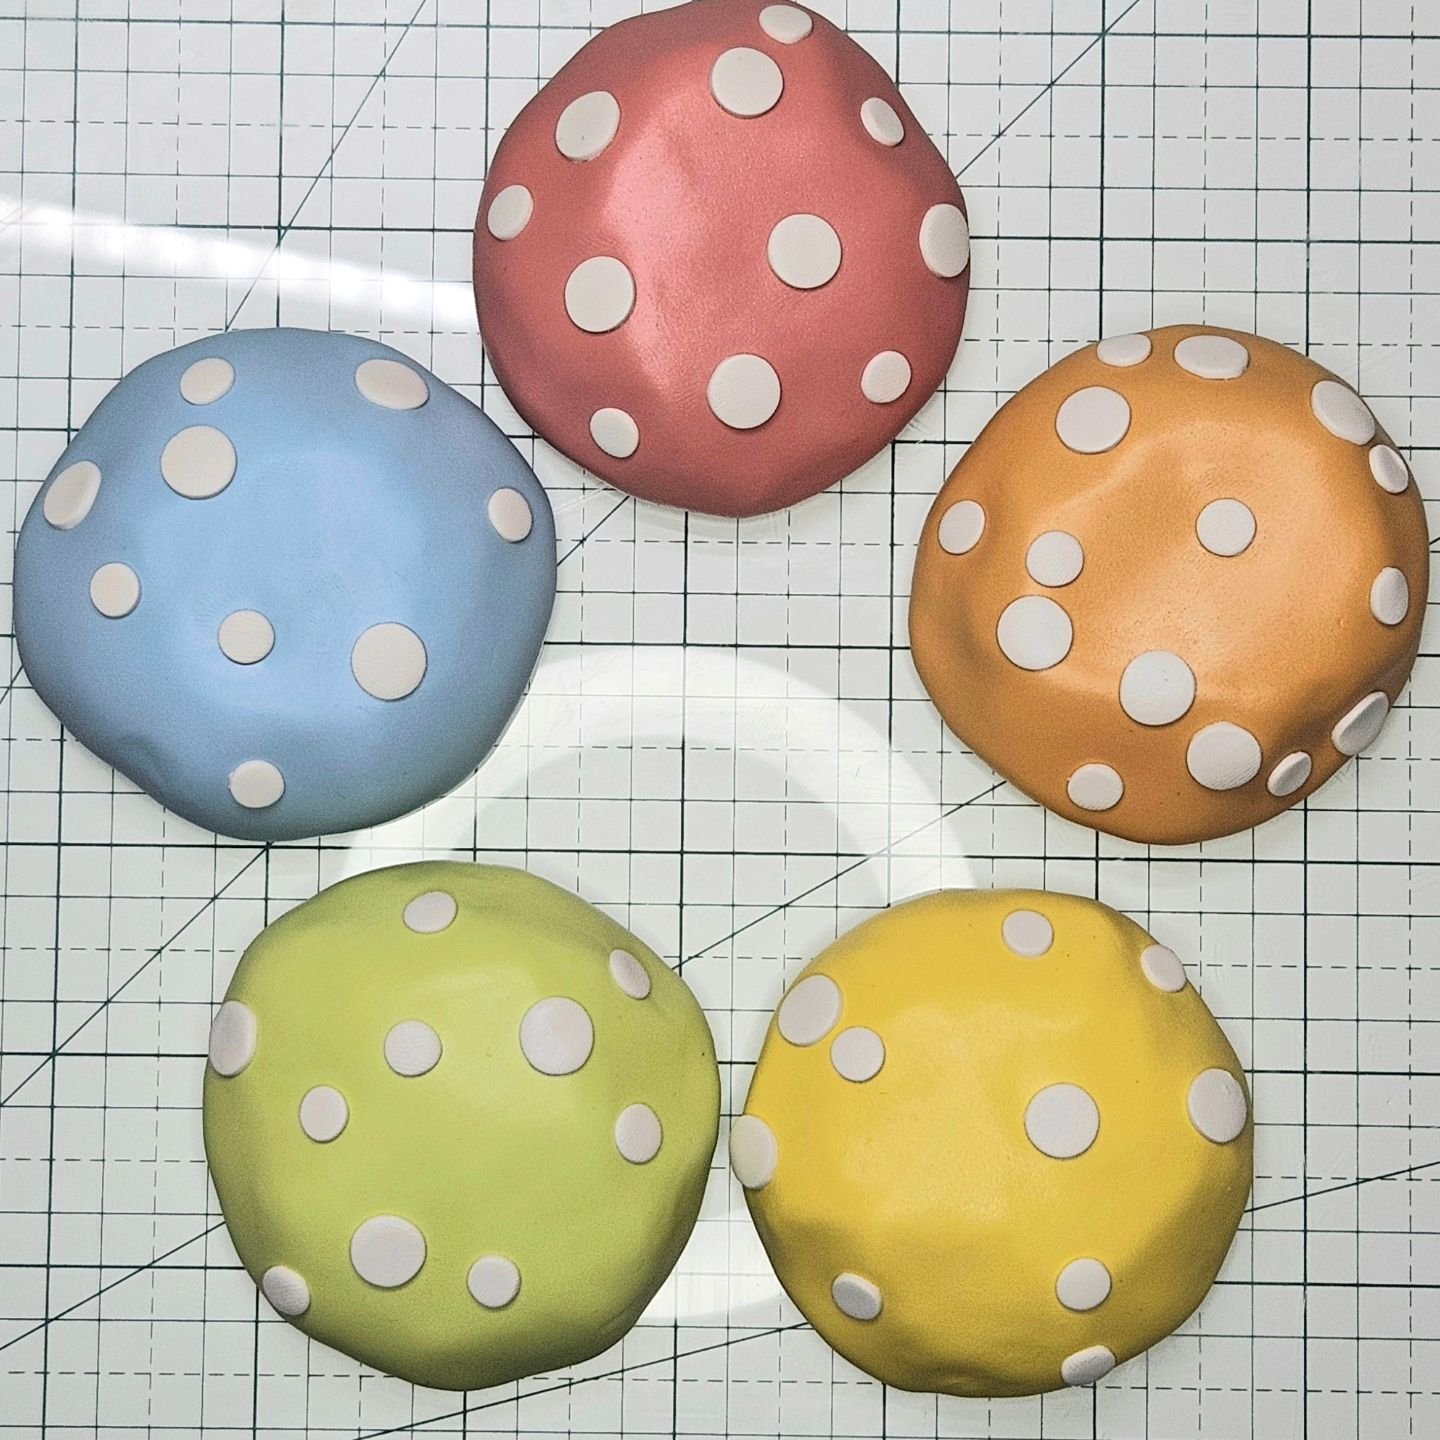 Currently on my desk...last batch of &quot;Whimsical Mushrooms &amp; Friends&quot; in the works. Hoping for a productive couple of days to get all these cuties complete ahead of schedule - all 100! 🤭😮

Love this current color palette btw...wonder w